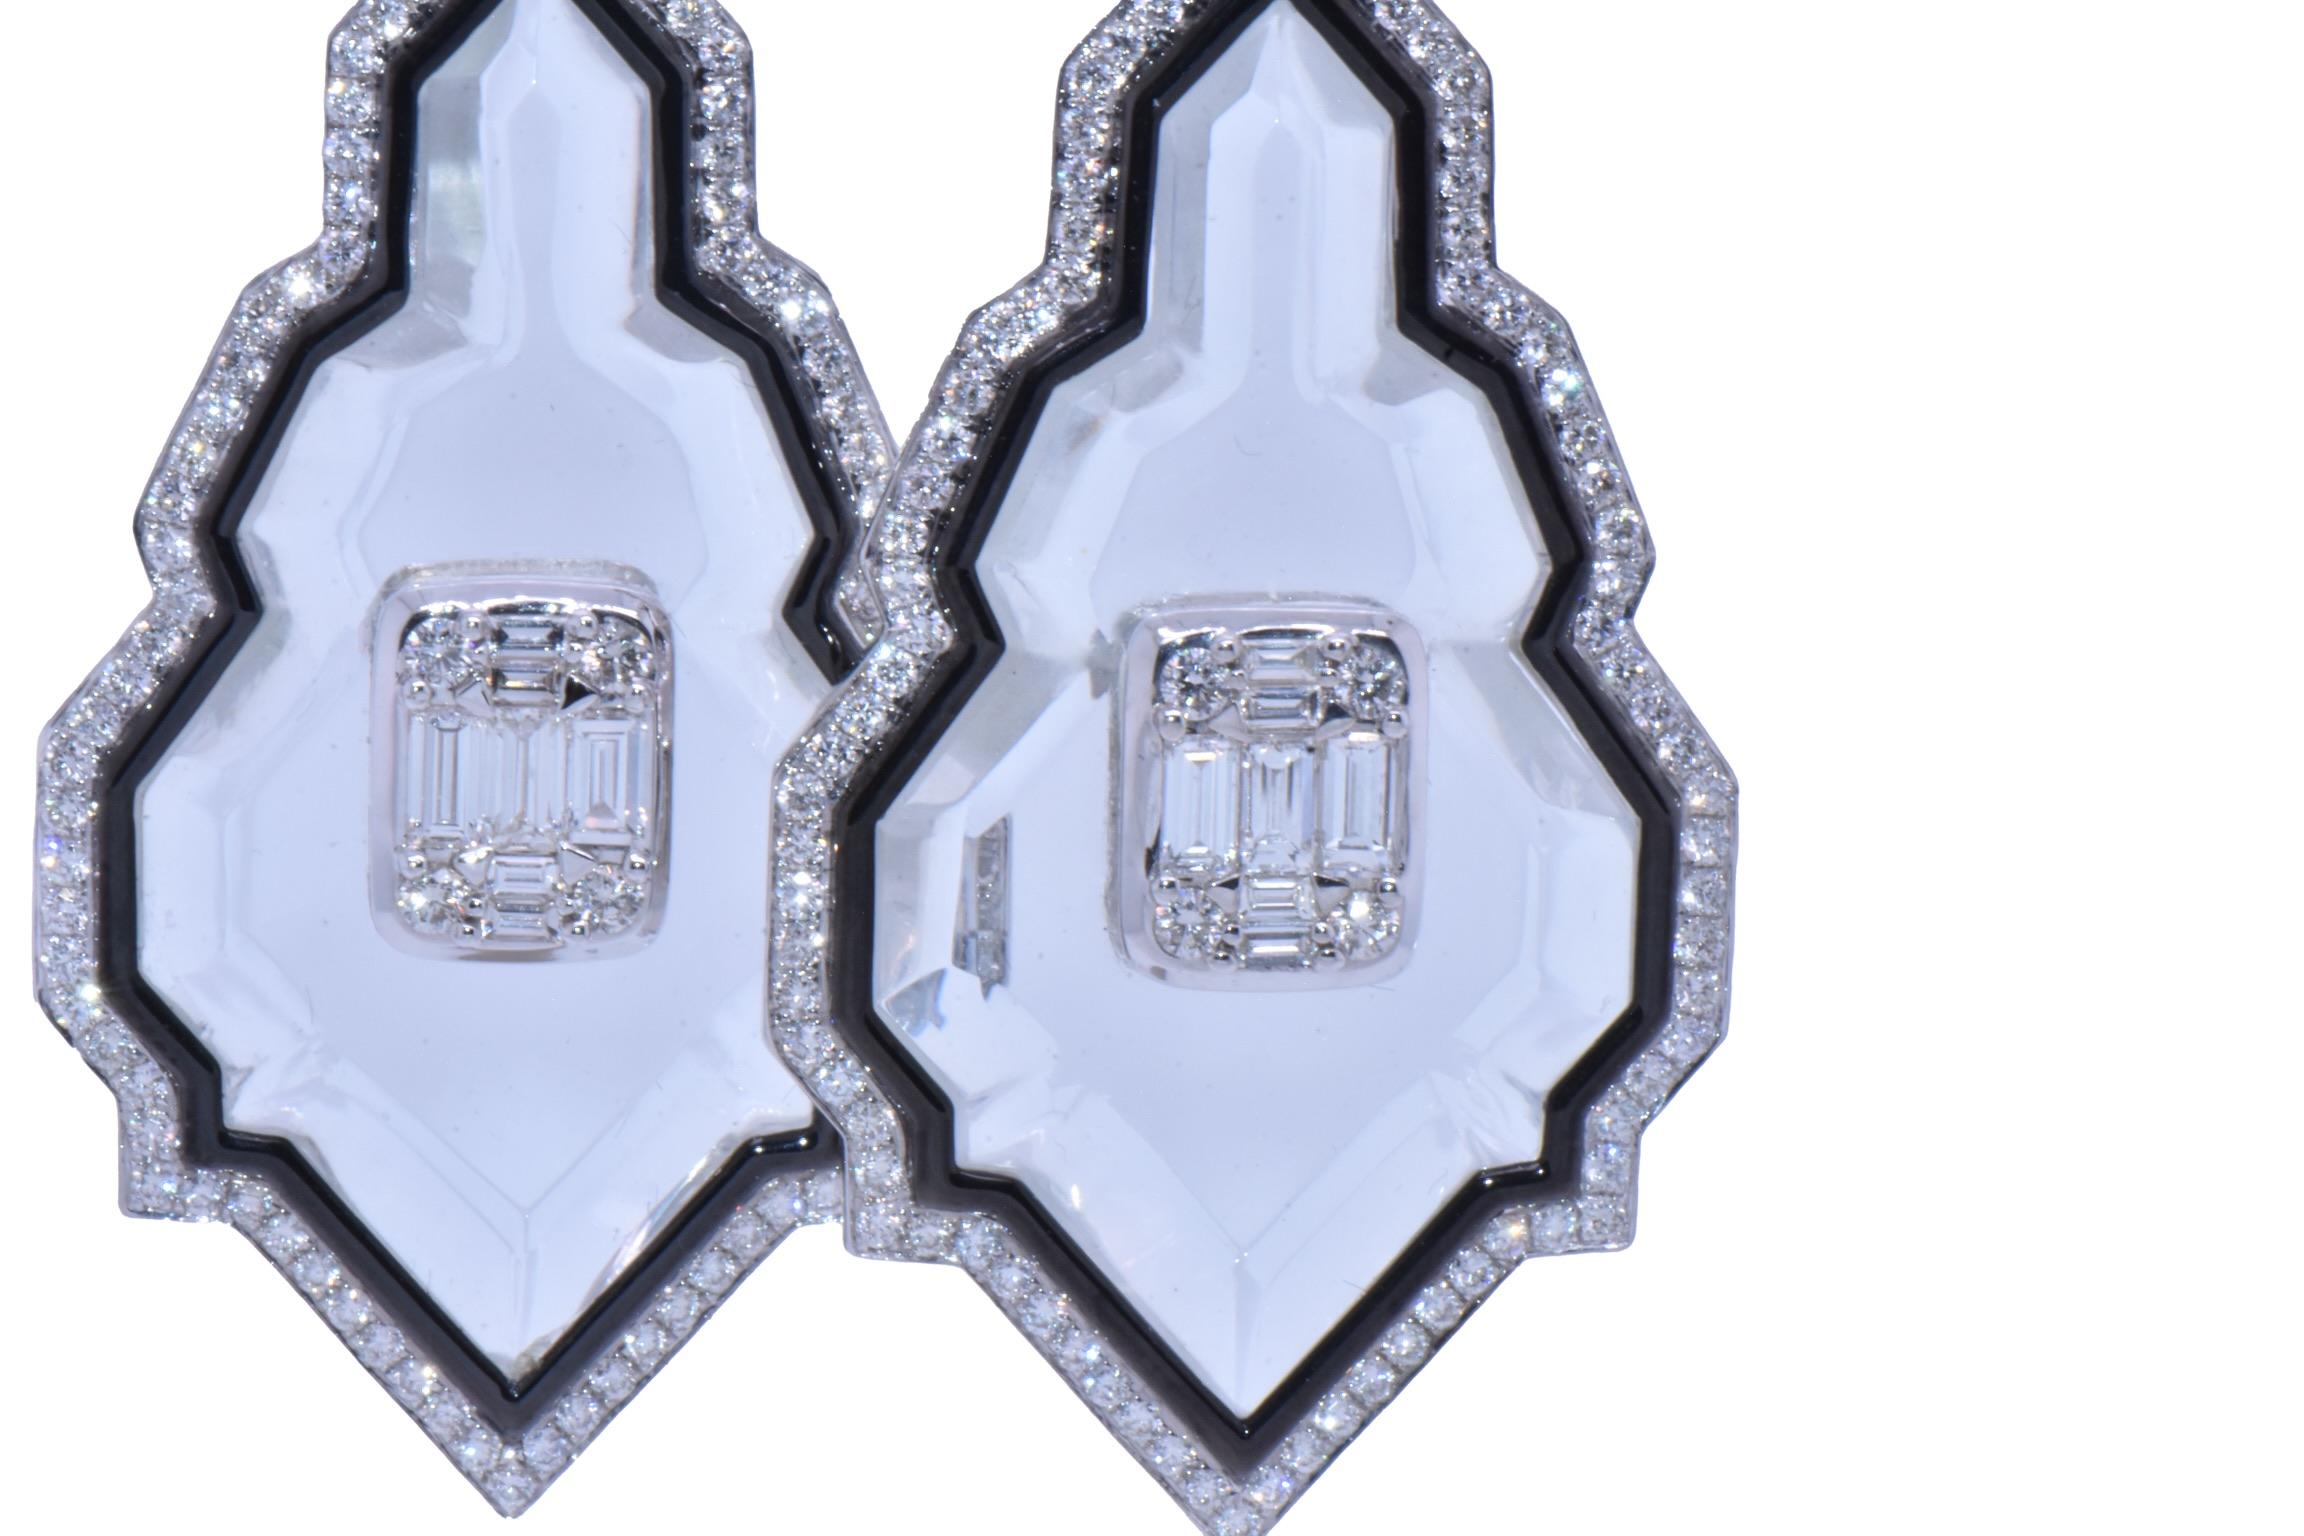 Sunray Crystal Diamond Earring In 18k White Gold

Beautiful One of a Kind Art-Deco Style Earrings, with Diamond border and a Baguette Diamond Center Setting on top of a Sunray Crystal 

Total Crystal Carat Weight: 5.46 Carats (total two